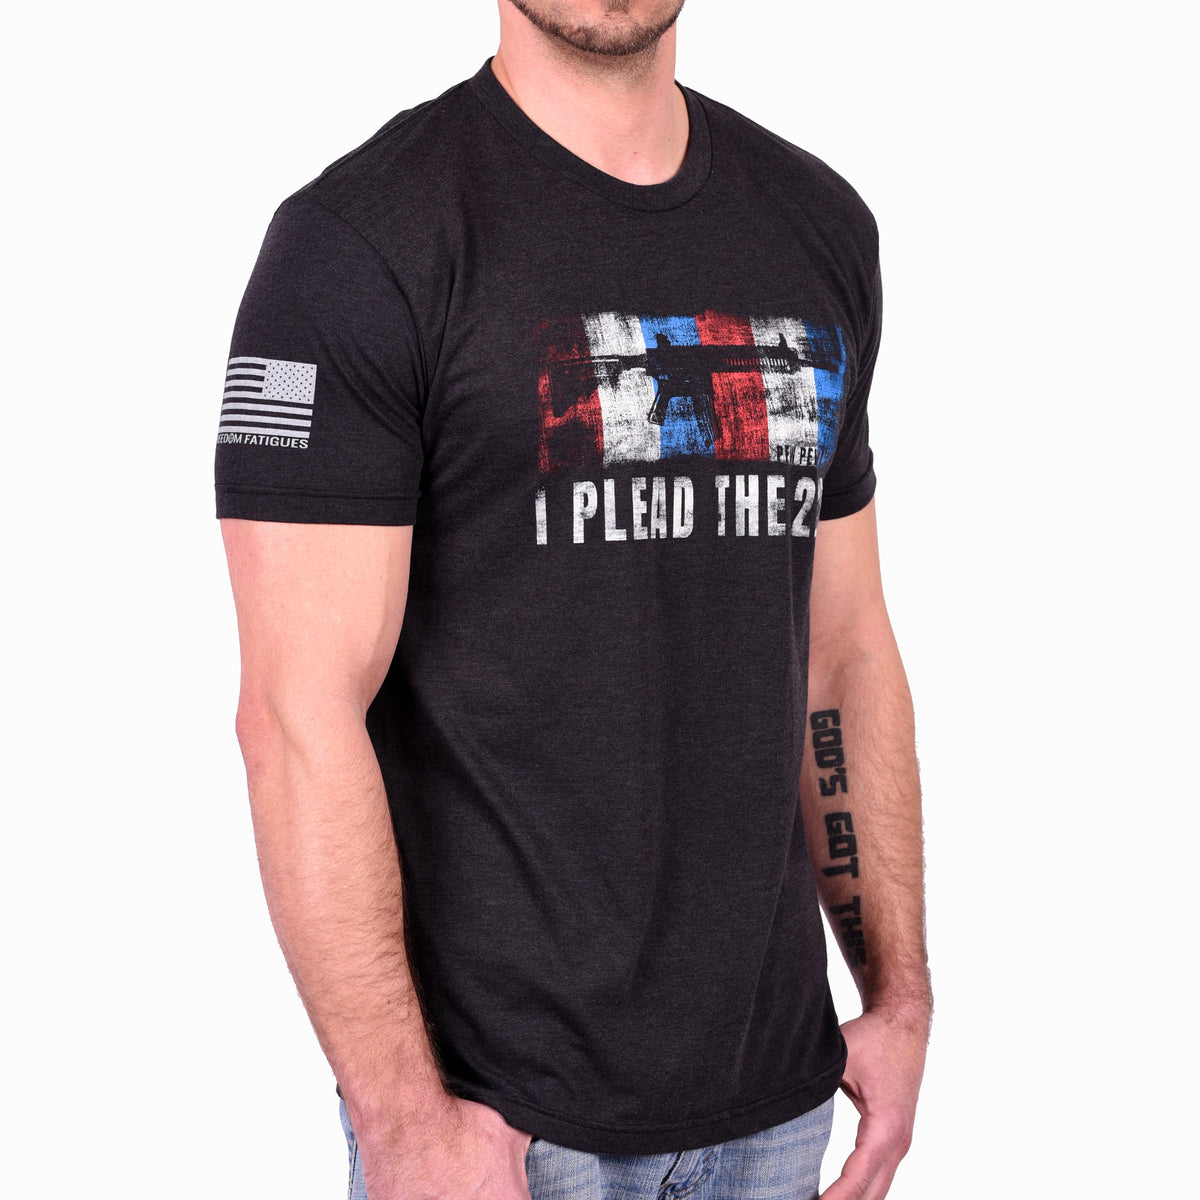 Men's "I Plead the 2nd" T-Shirt by Pew Pew Nation